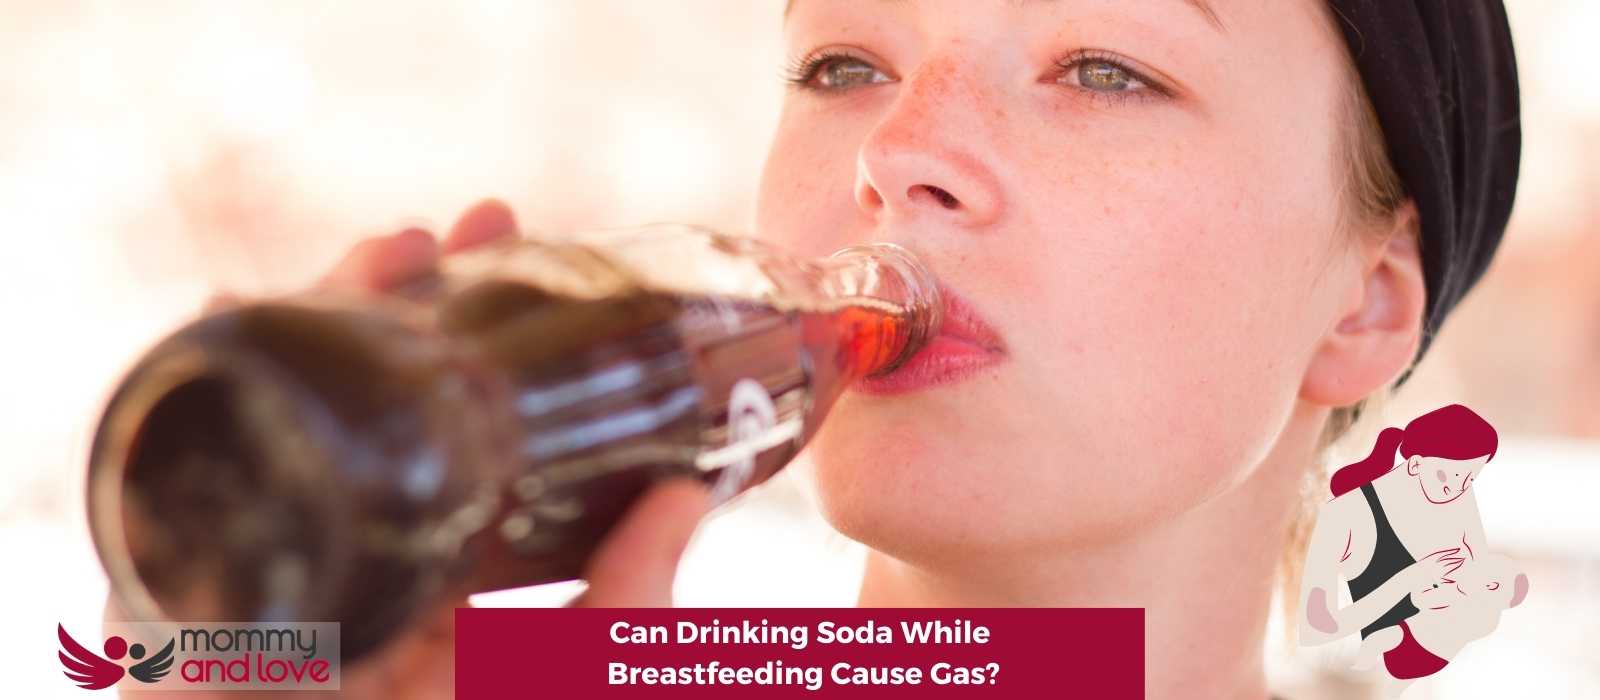 Can Drinking Soda While Breastfeeding Cause Gas